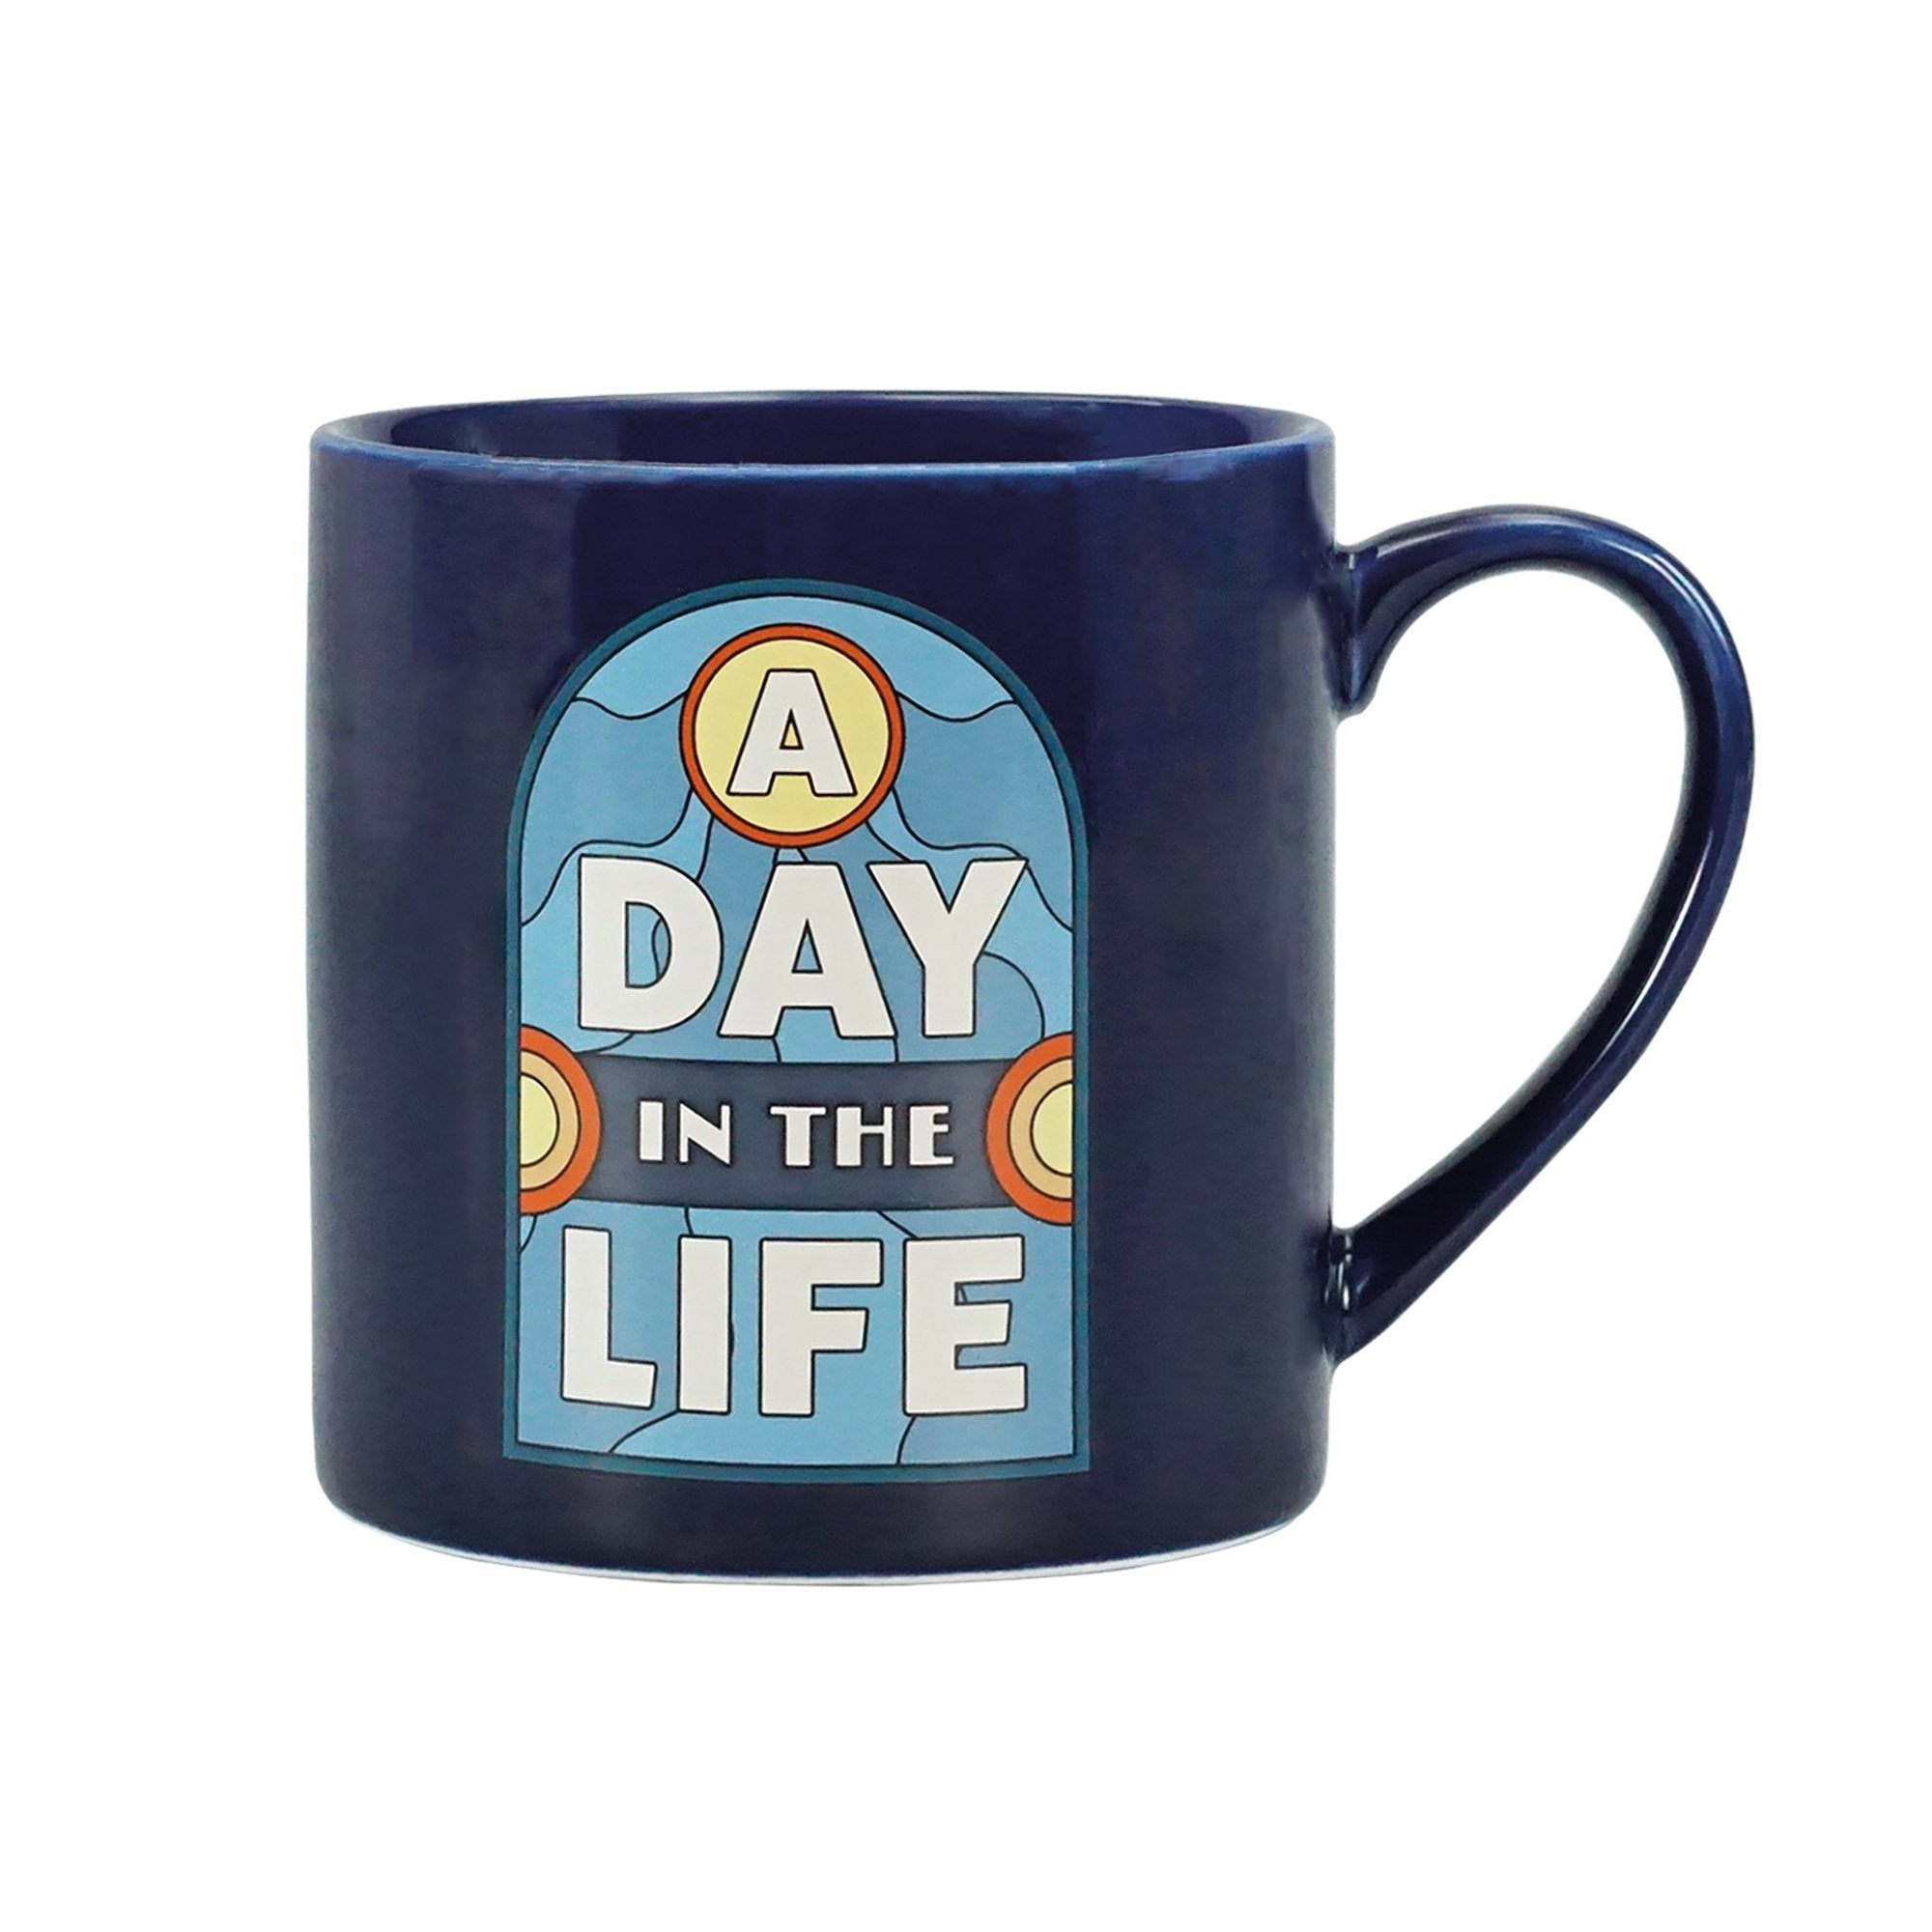 Mug Classic Boxed (310ml) - The Beatles (A Day in the Life)